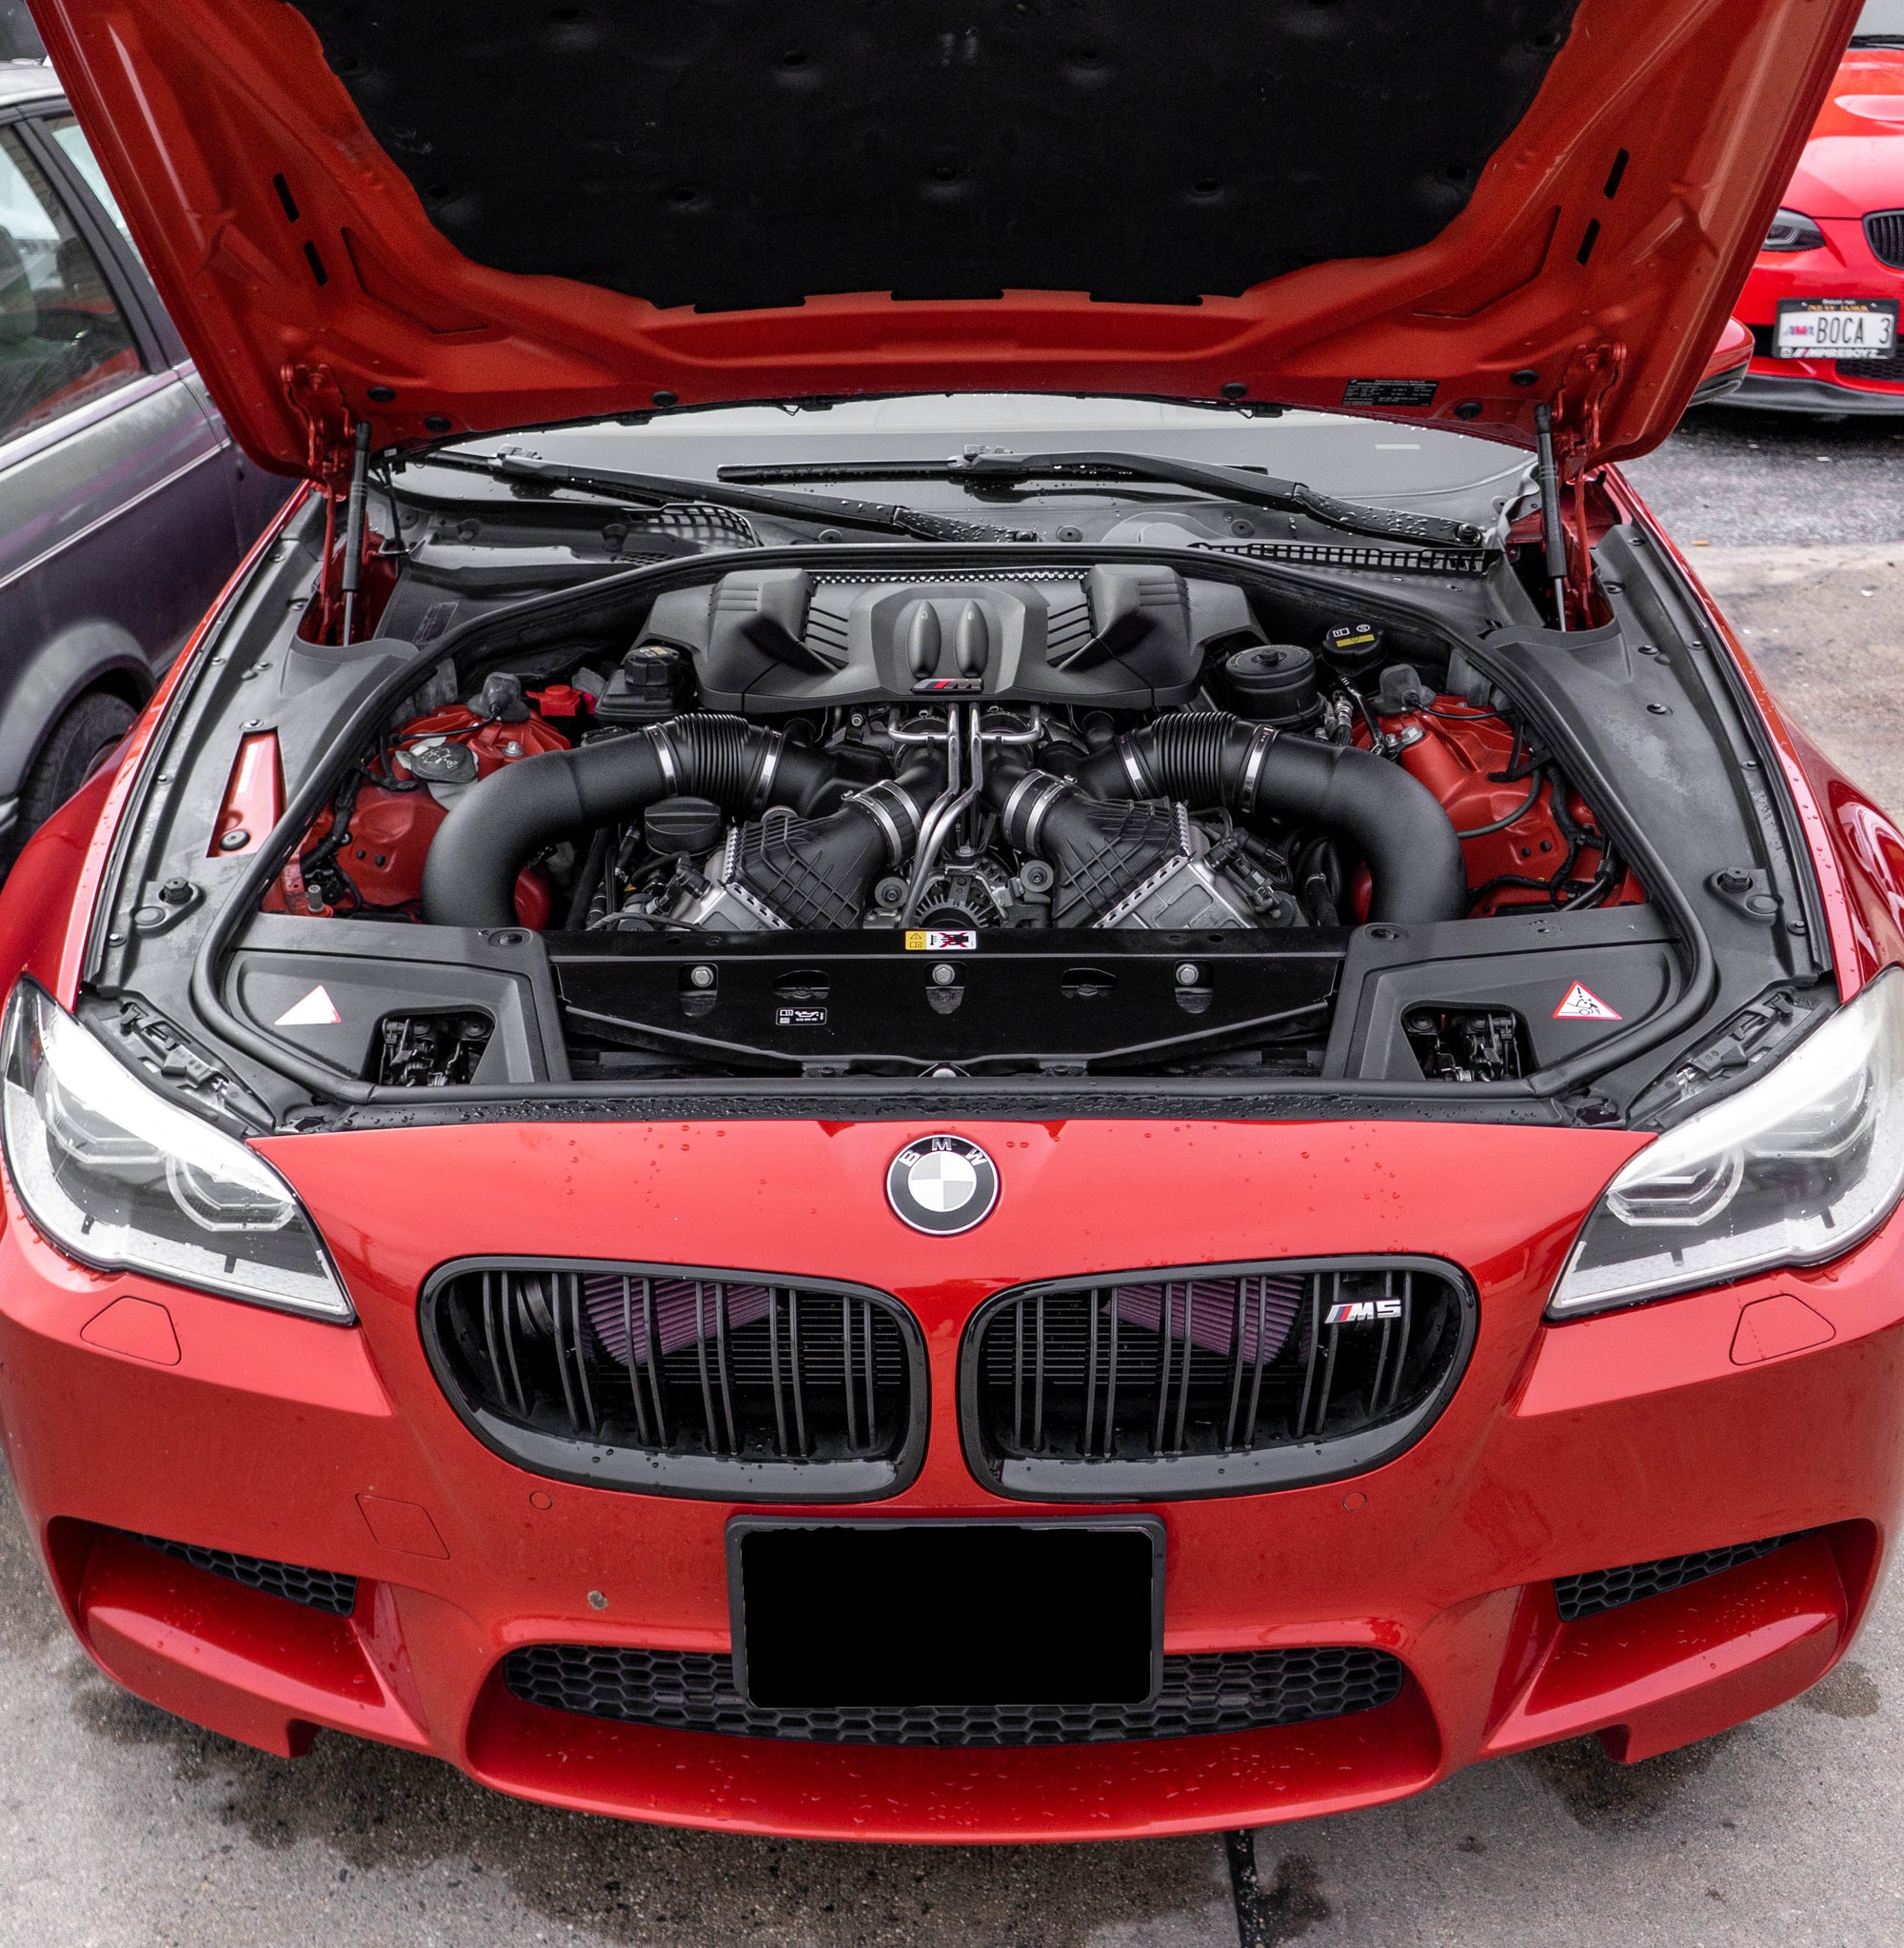 F series M5 / M6 Front Mount Intakes